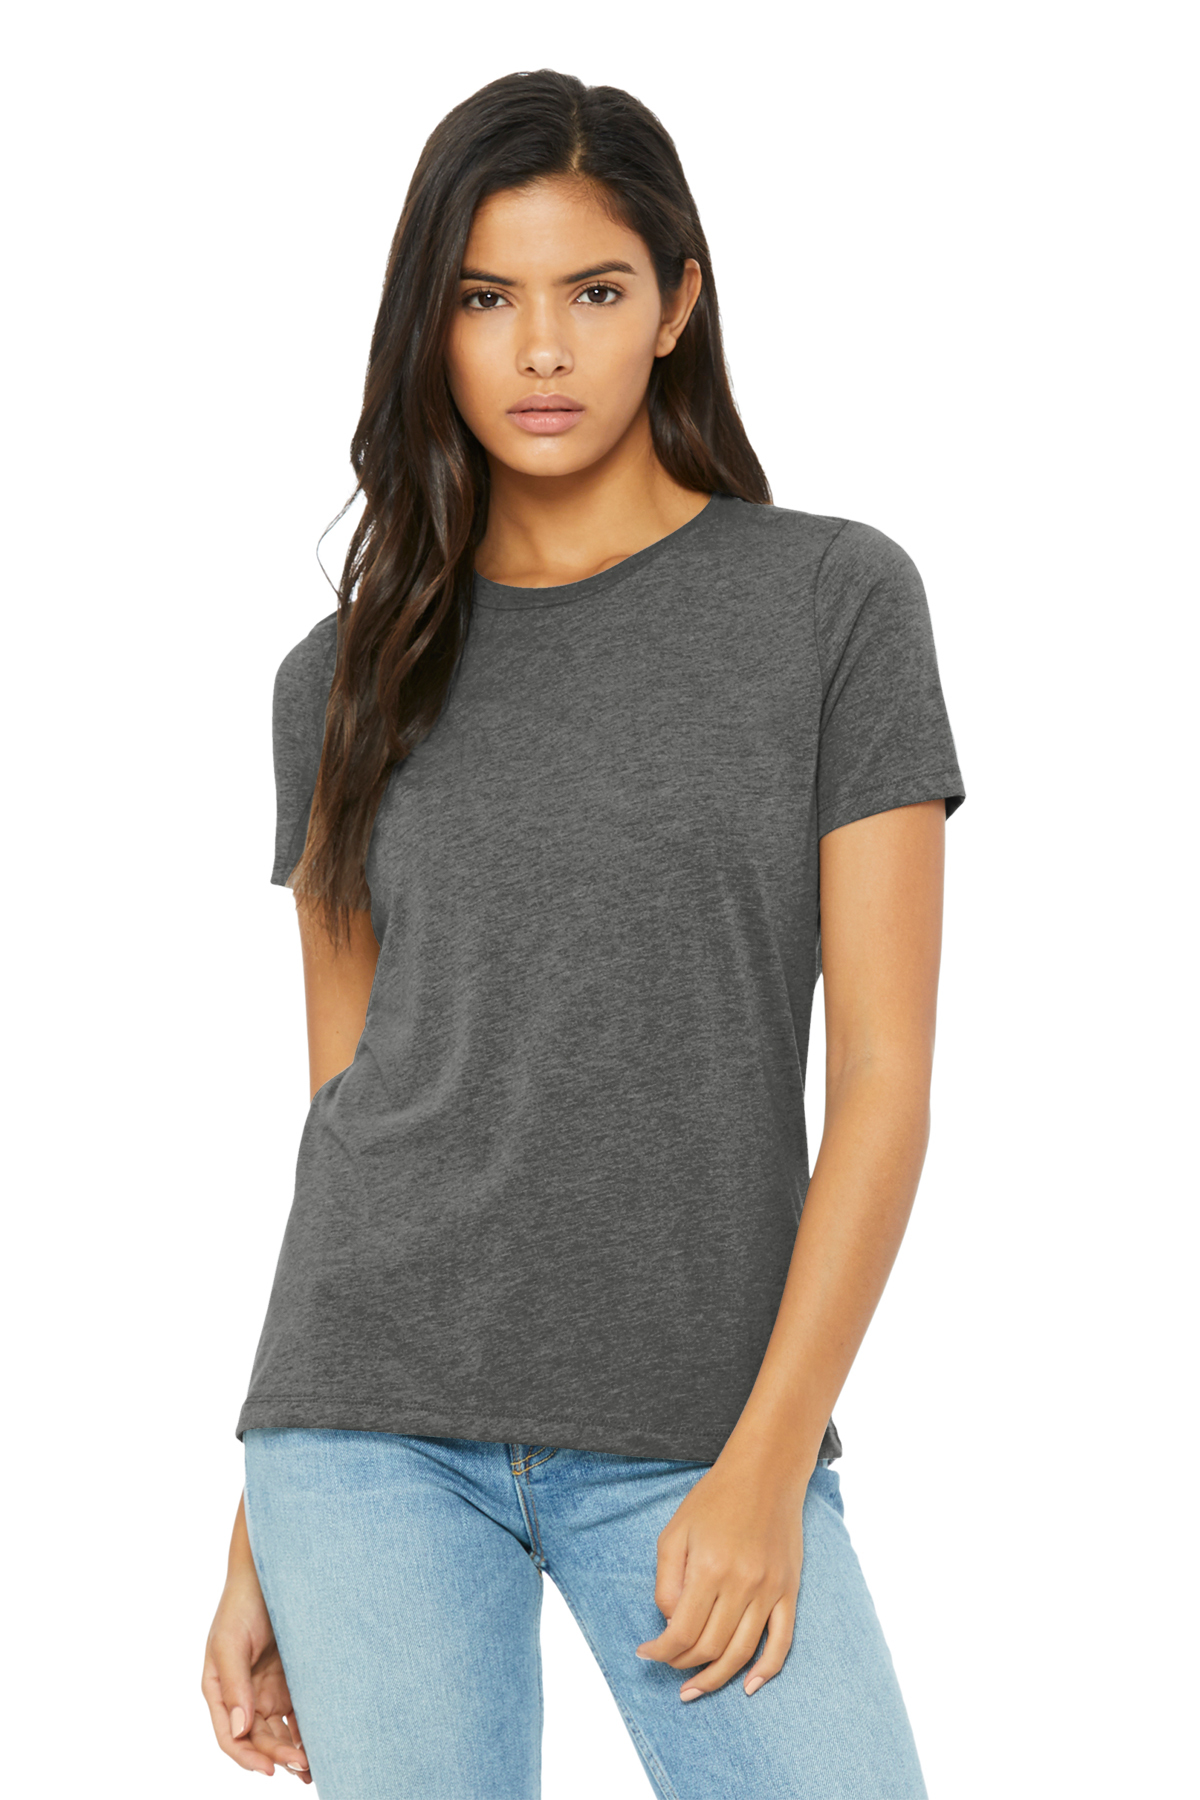 BELLA+CANVAS Women’s Relaxed Triblend Tee | Product | SanMar